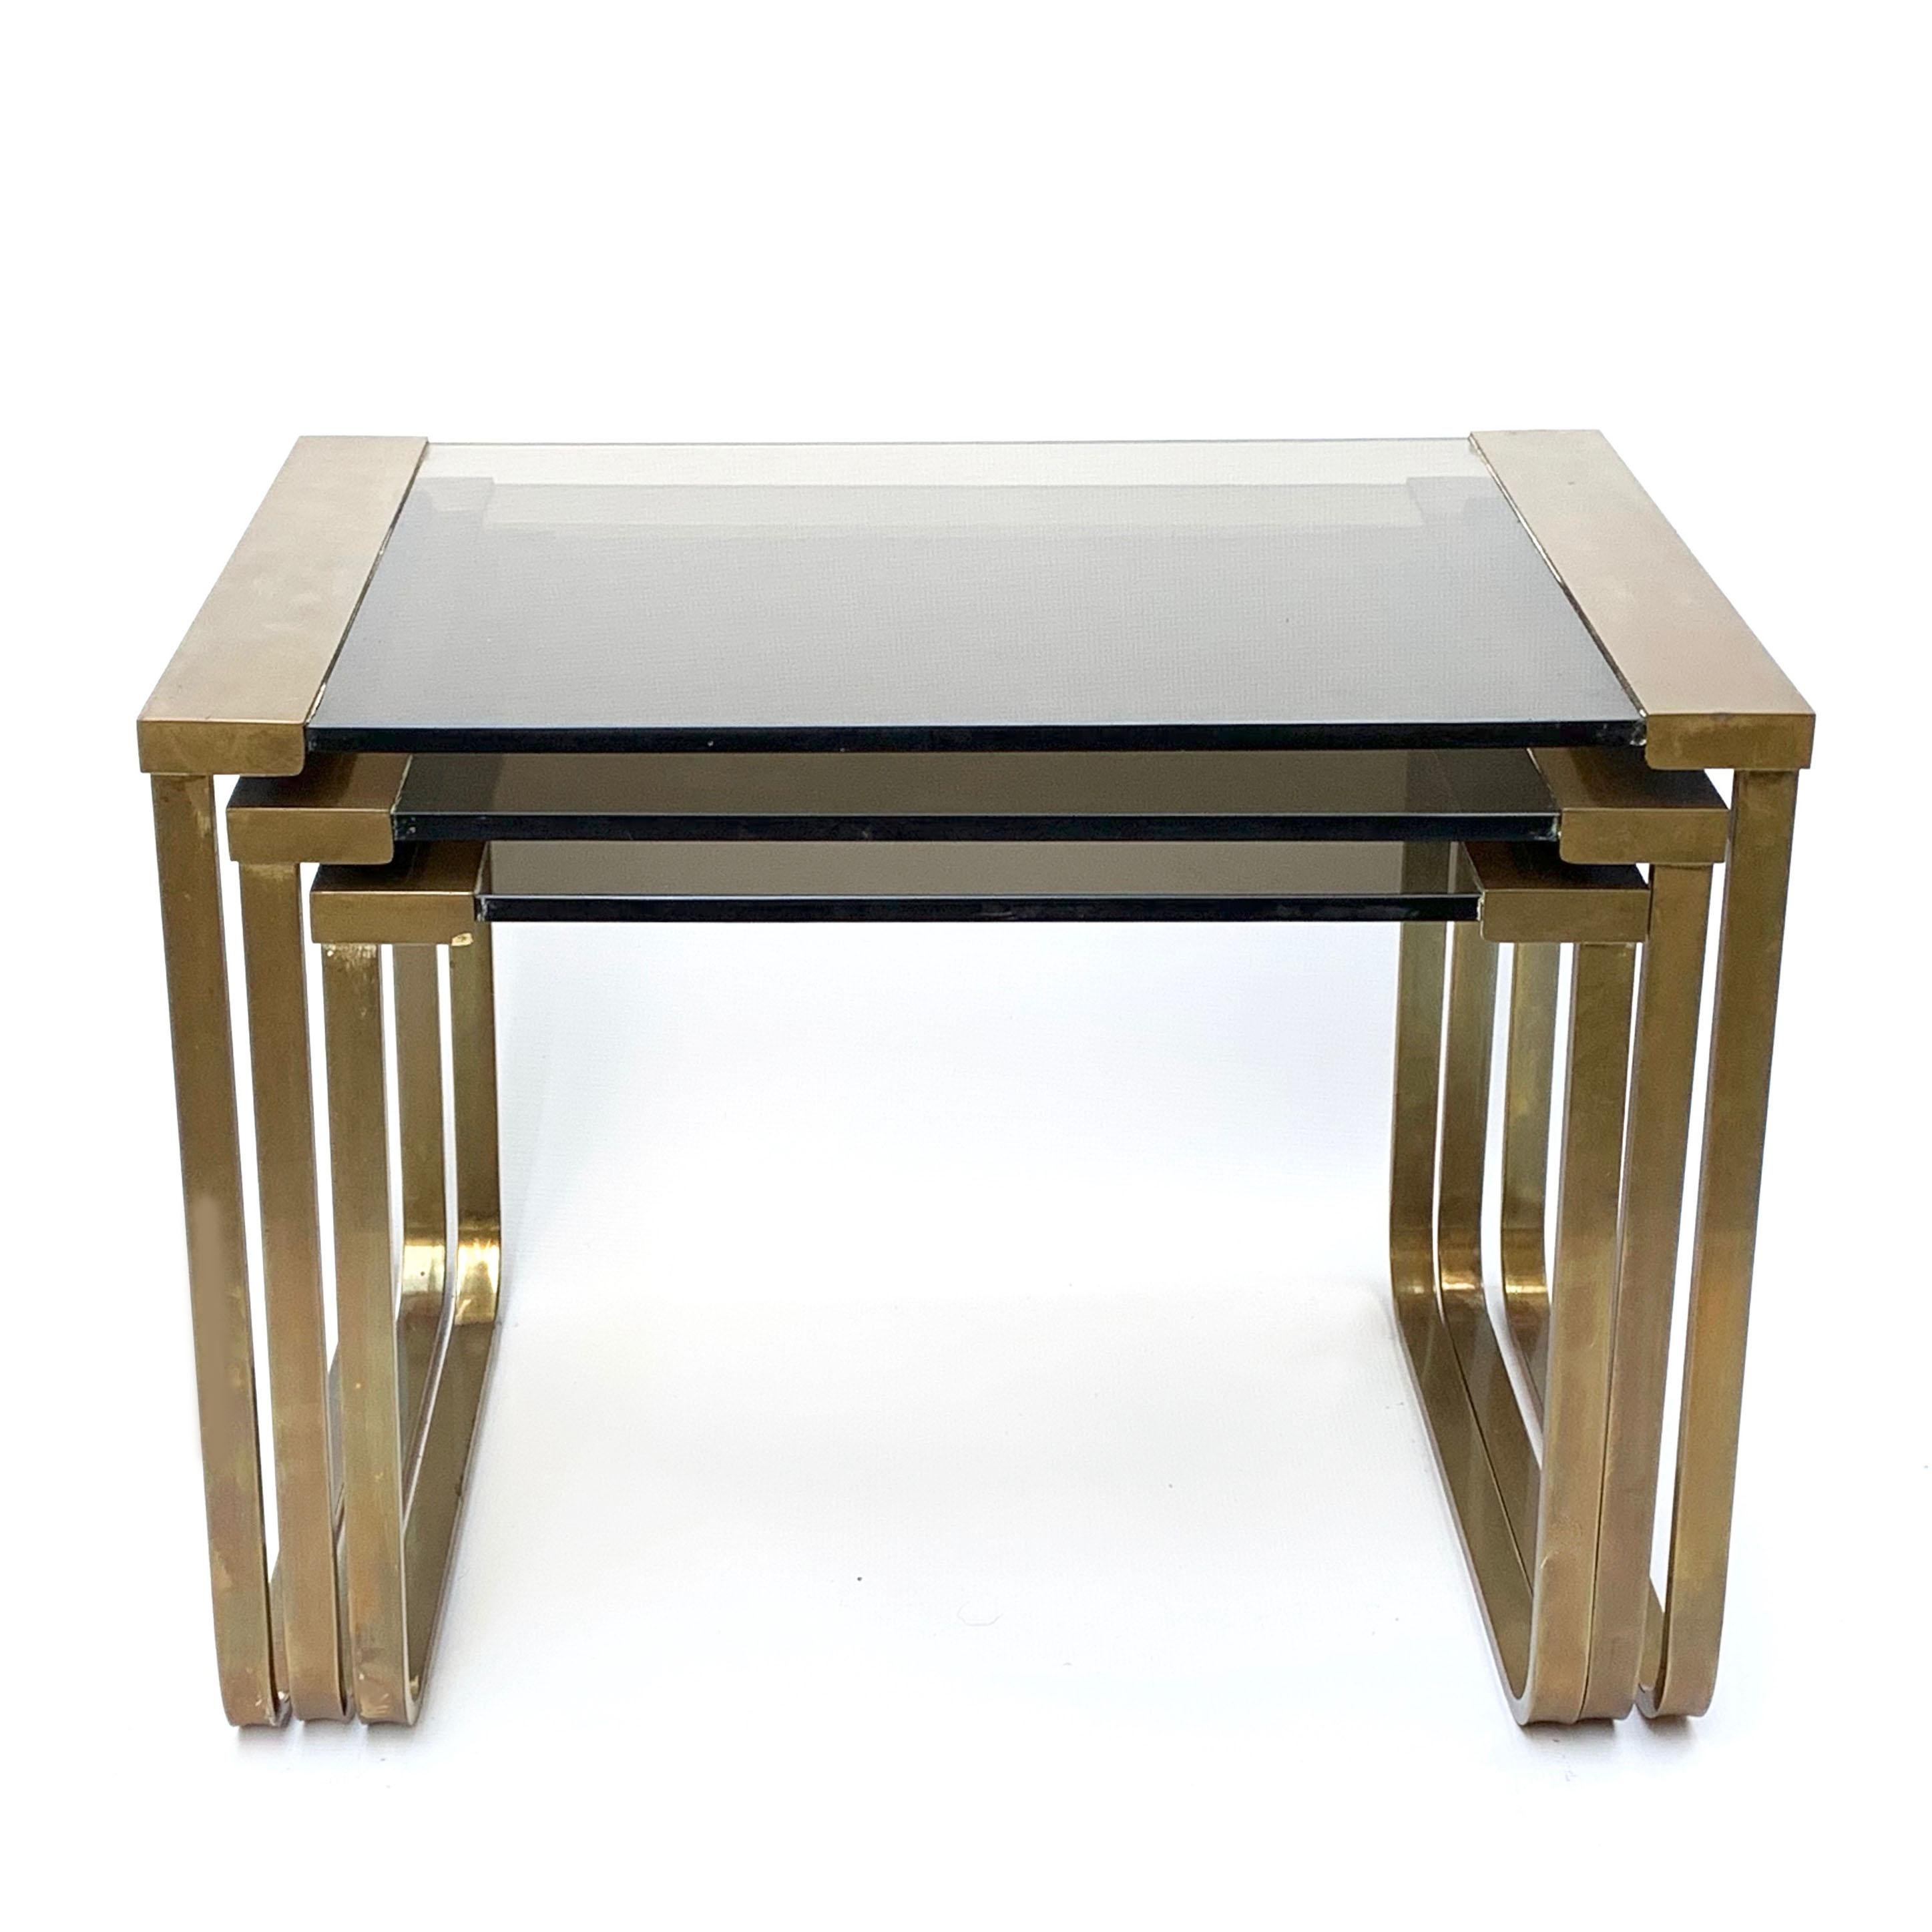 Crystal Set of Three Interlocking Tables in Satin Brass and Smoked Glass, France, 1970s